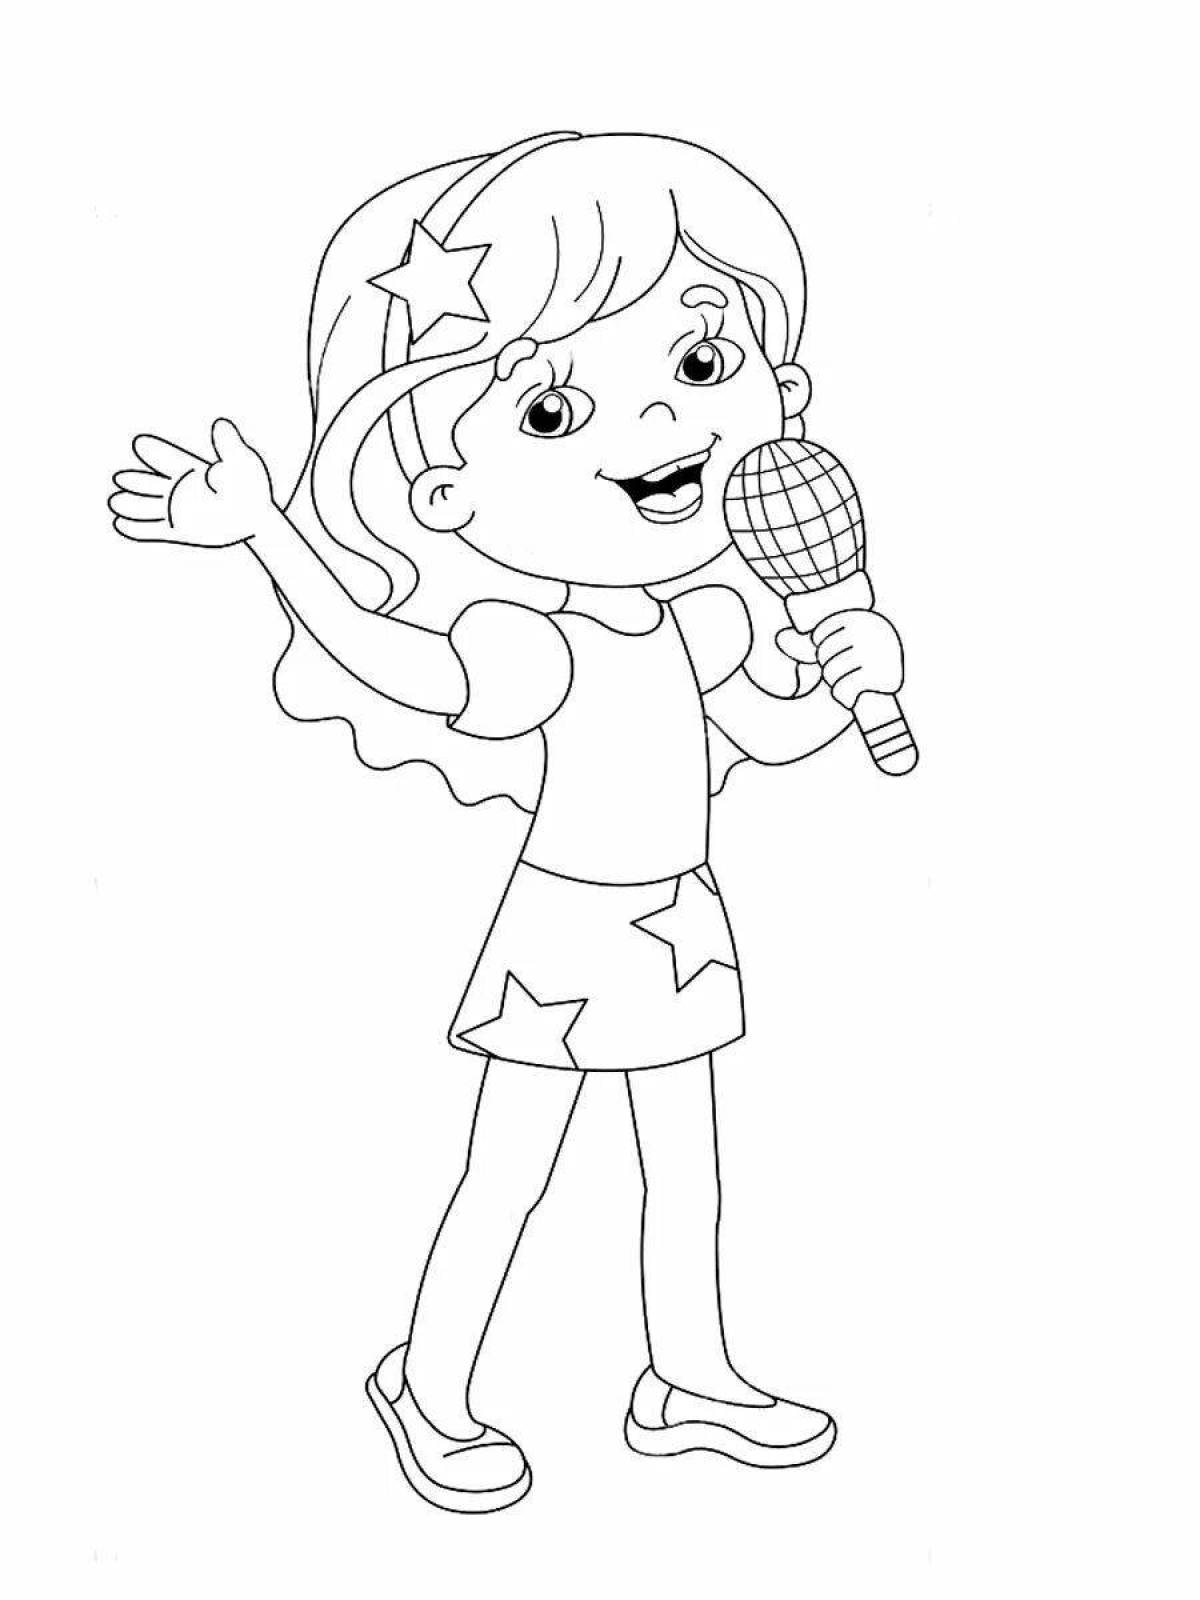 Holiday singer coloring pages for kids